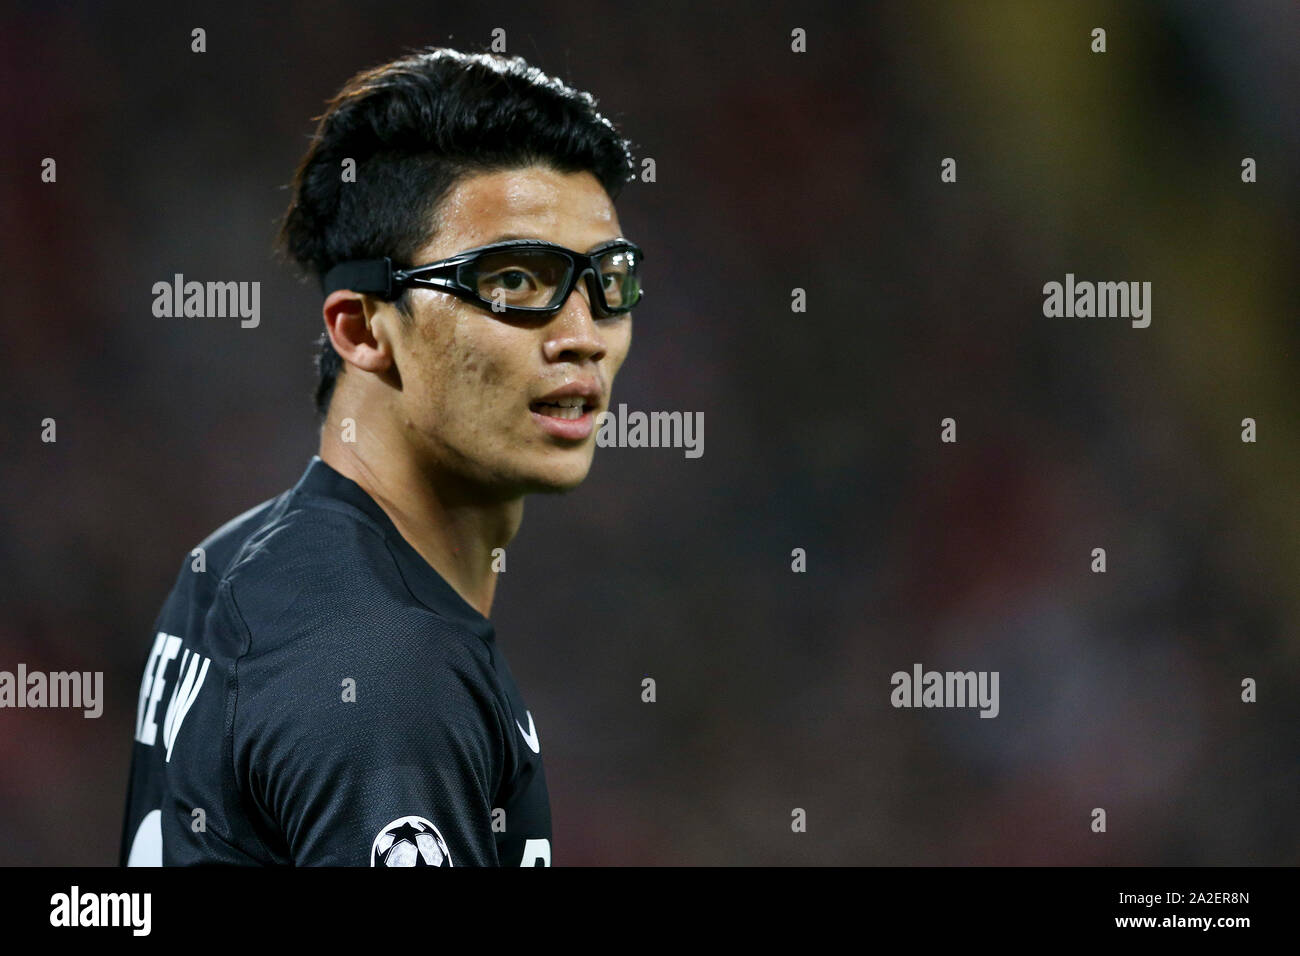 Liverpool Uk 02nd Oct 19 Hwang Hee Chan Of Red Bull Salzburg Looks On Wearing Protective Glasses Uefa Champions League Group E Match Liverpool V Fc Red Bull Salzburg At Anfield Stadium In